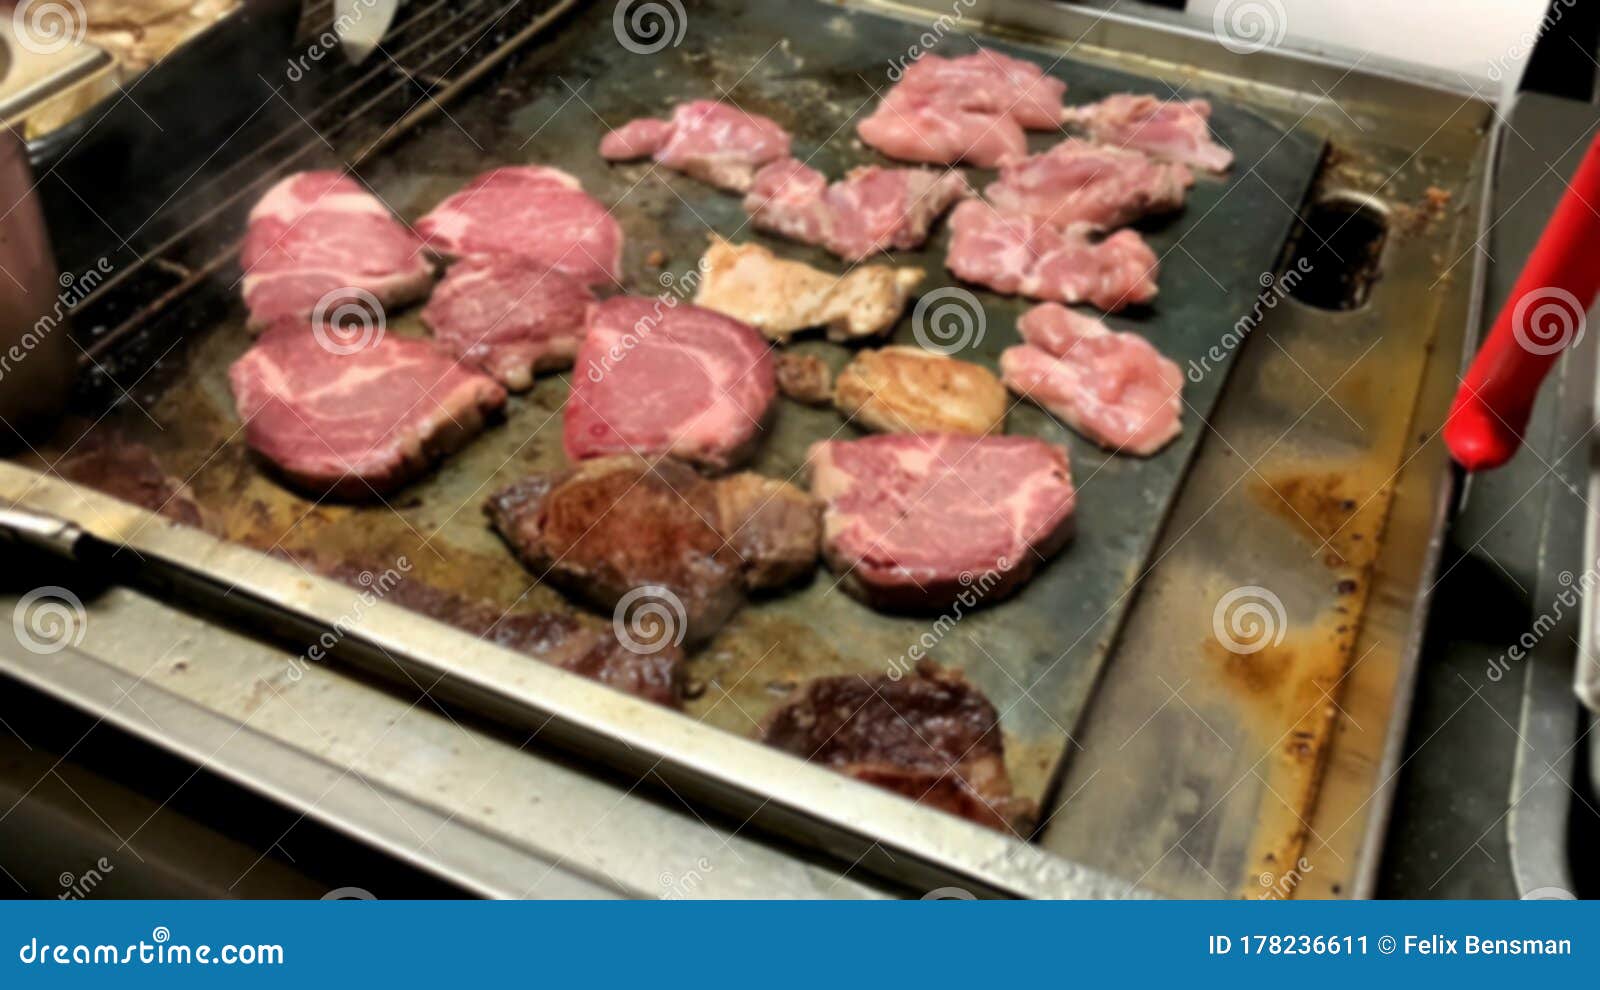 Preparation A Steak On An Electric Stove Stock Image Image Of Baking Beef 178236611